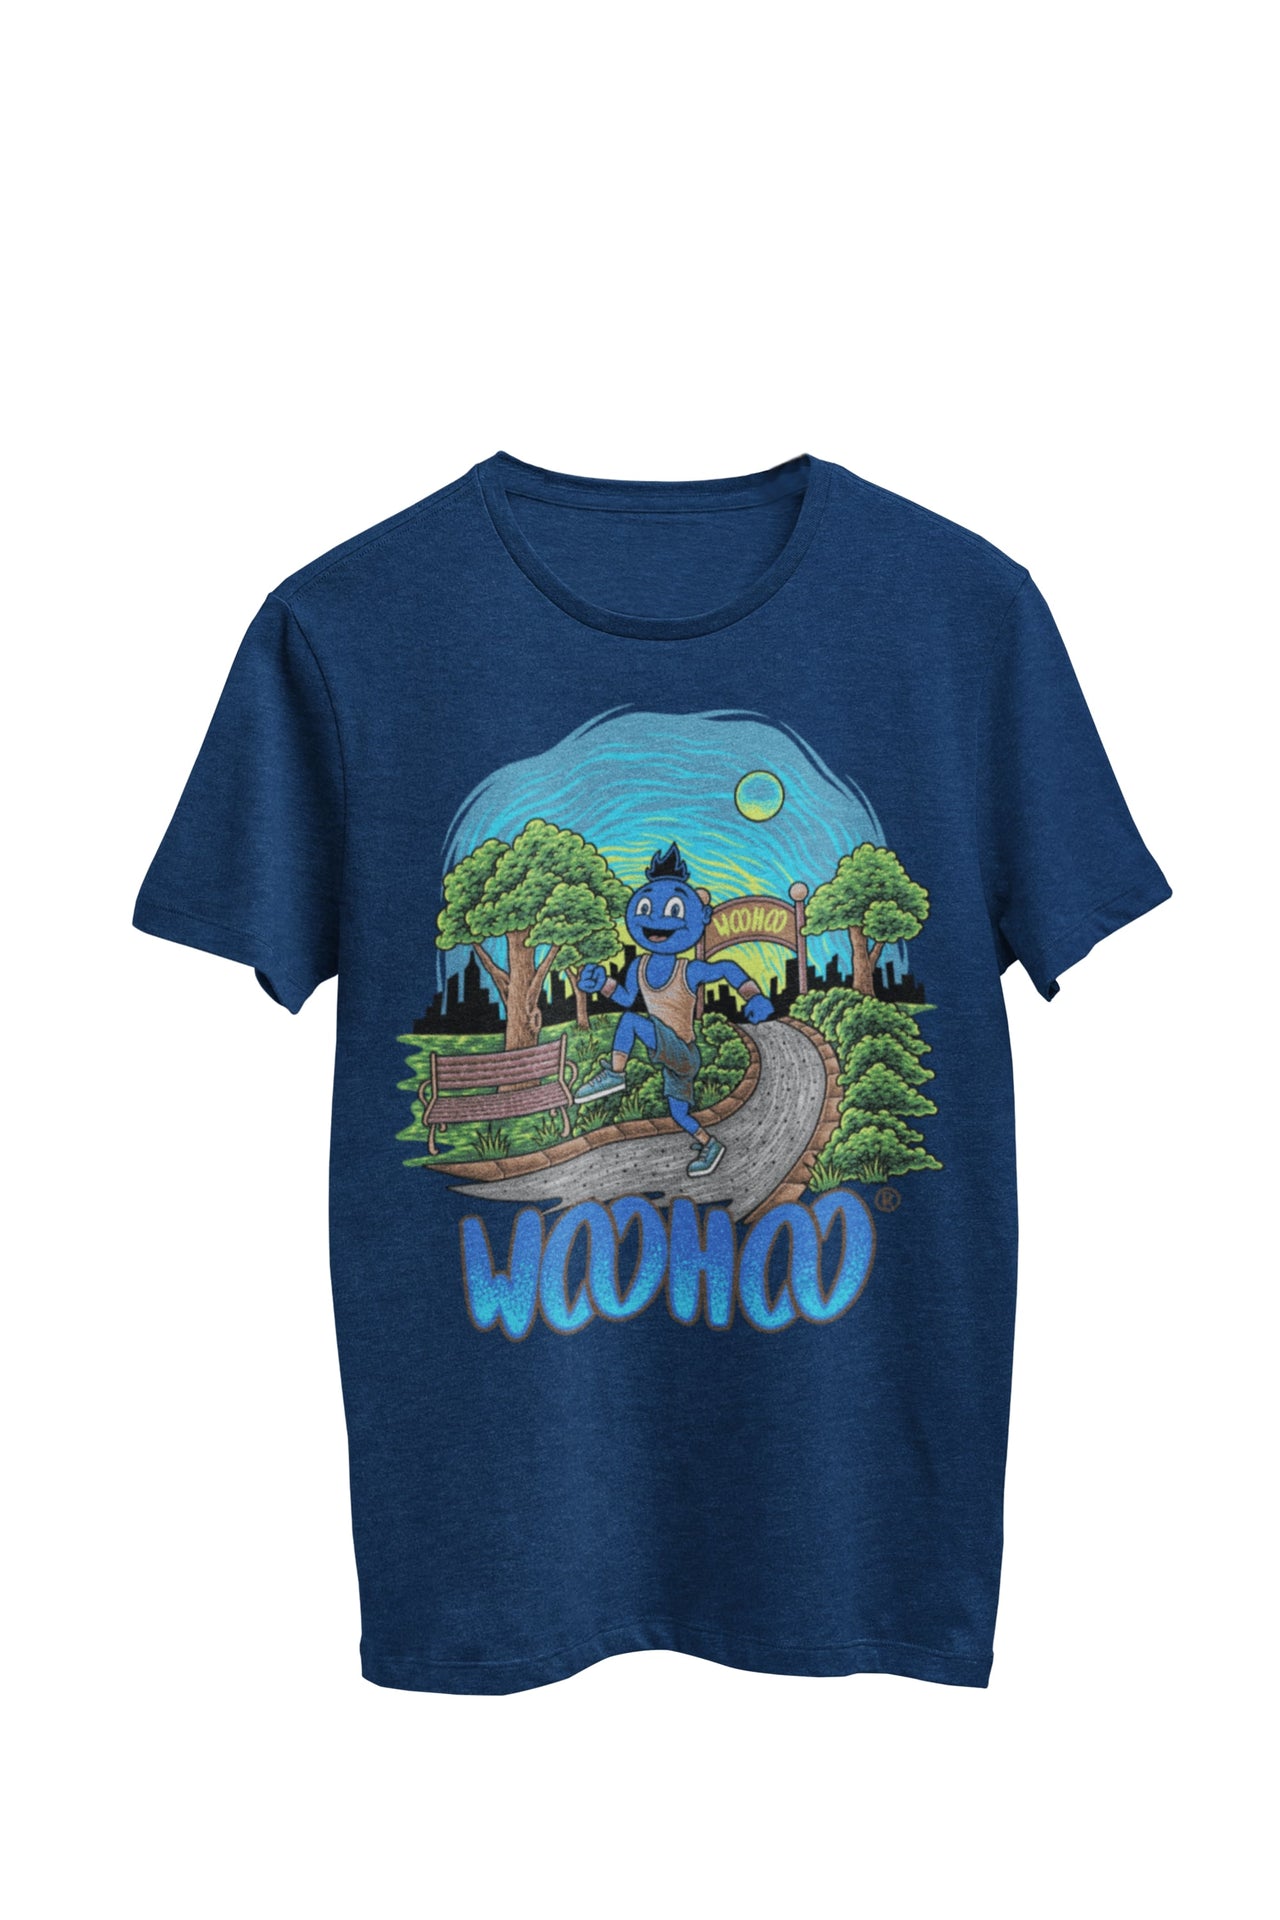 WooHooBerry exuberantly running through the beauty of nature during an outdoor sports activity, adorned in a navy T-shirt featuring the spirited text 'WooHoo.' Embracing the joy of the moment and the outdoors.